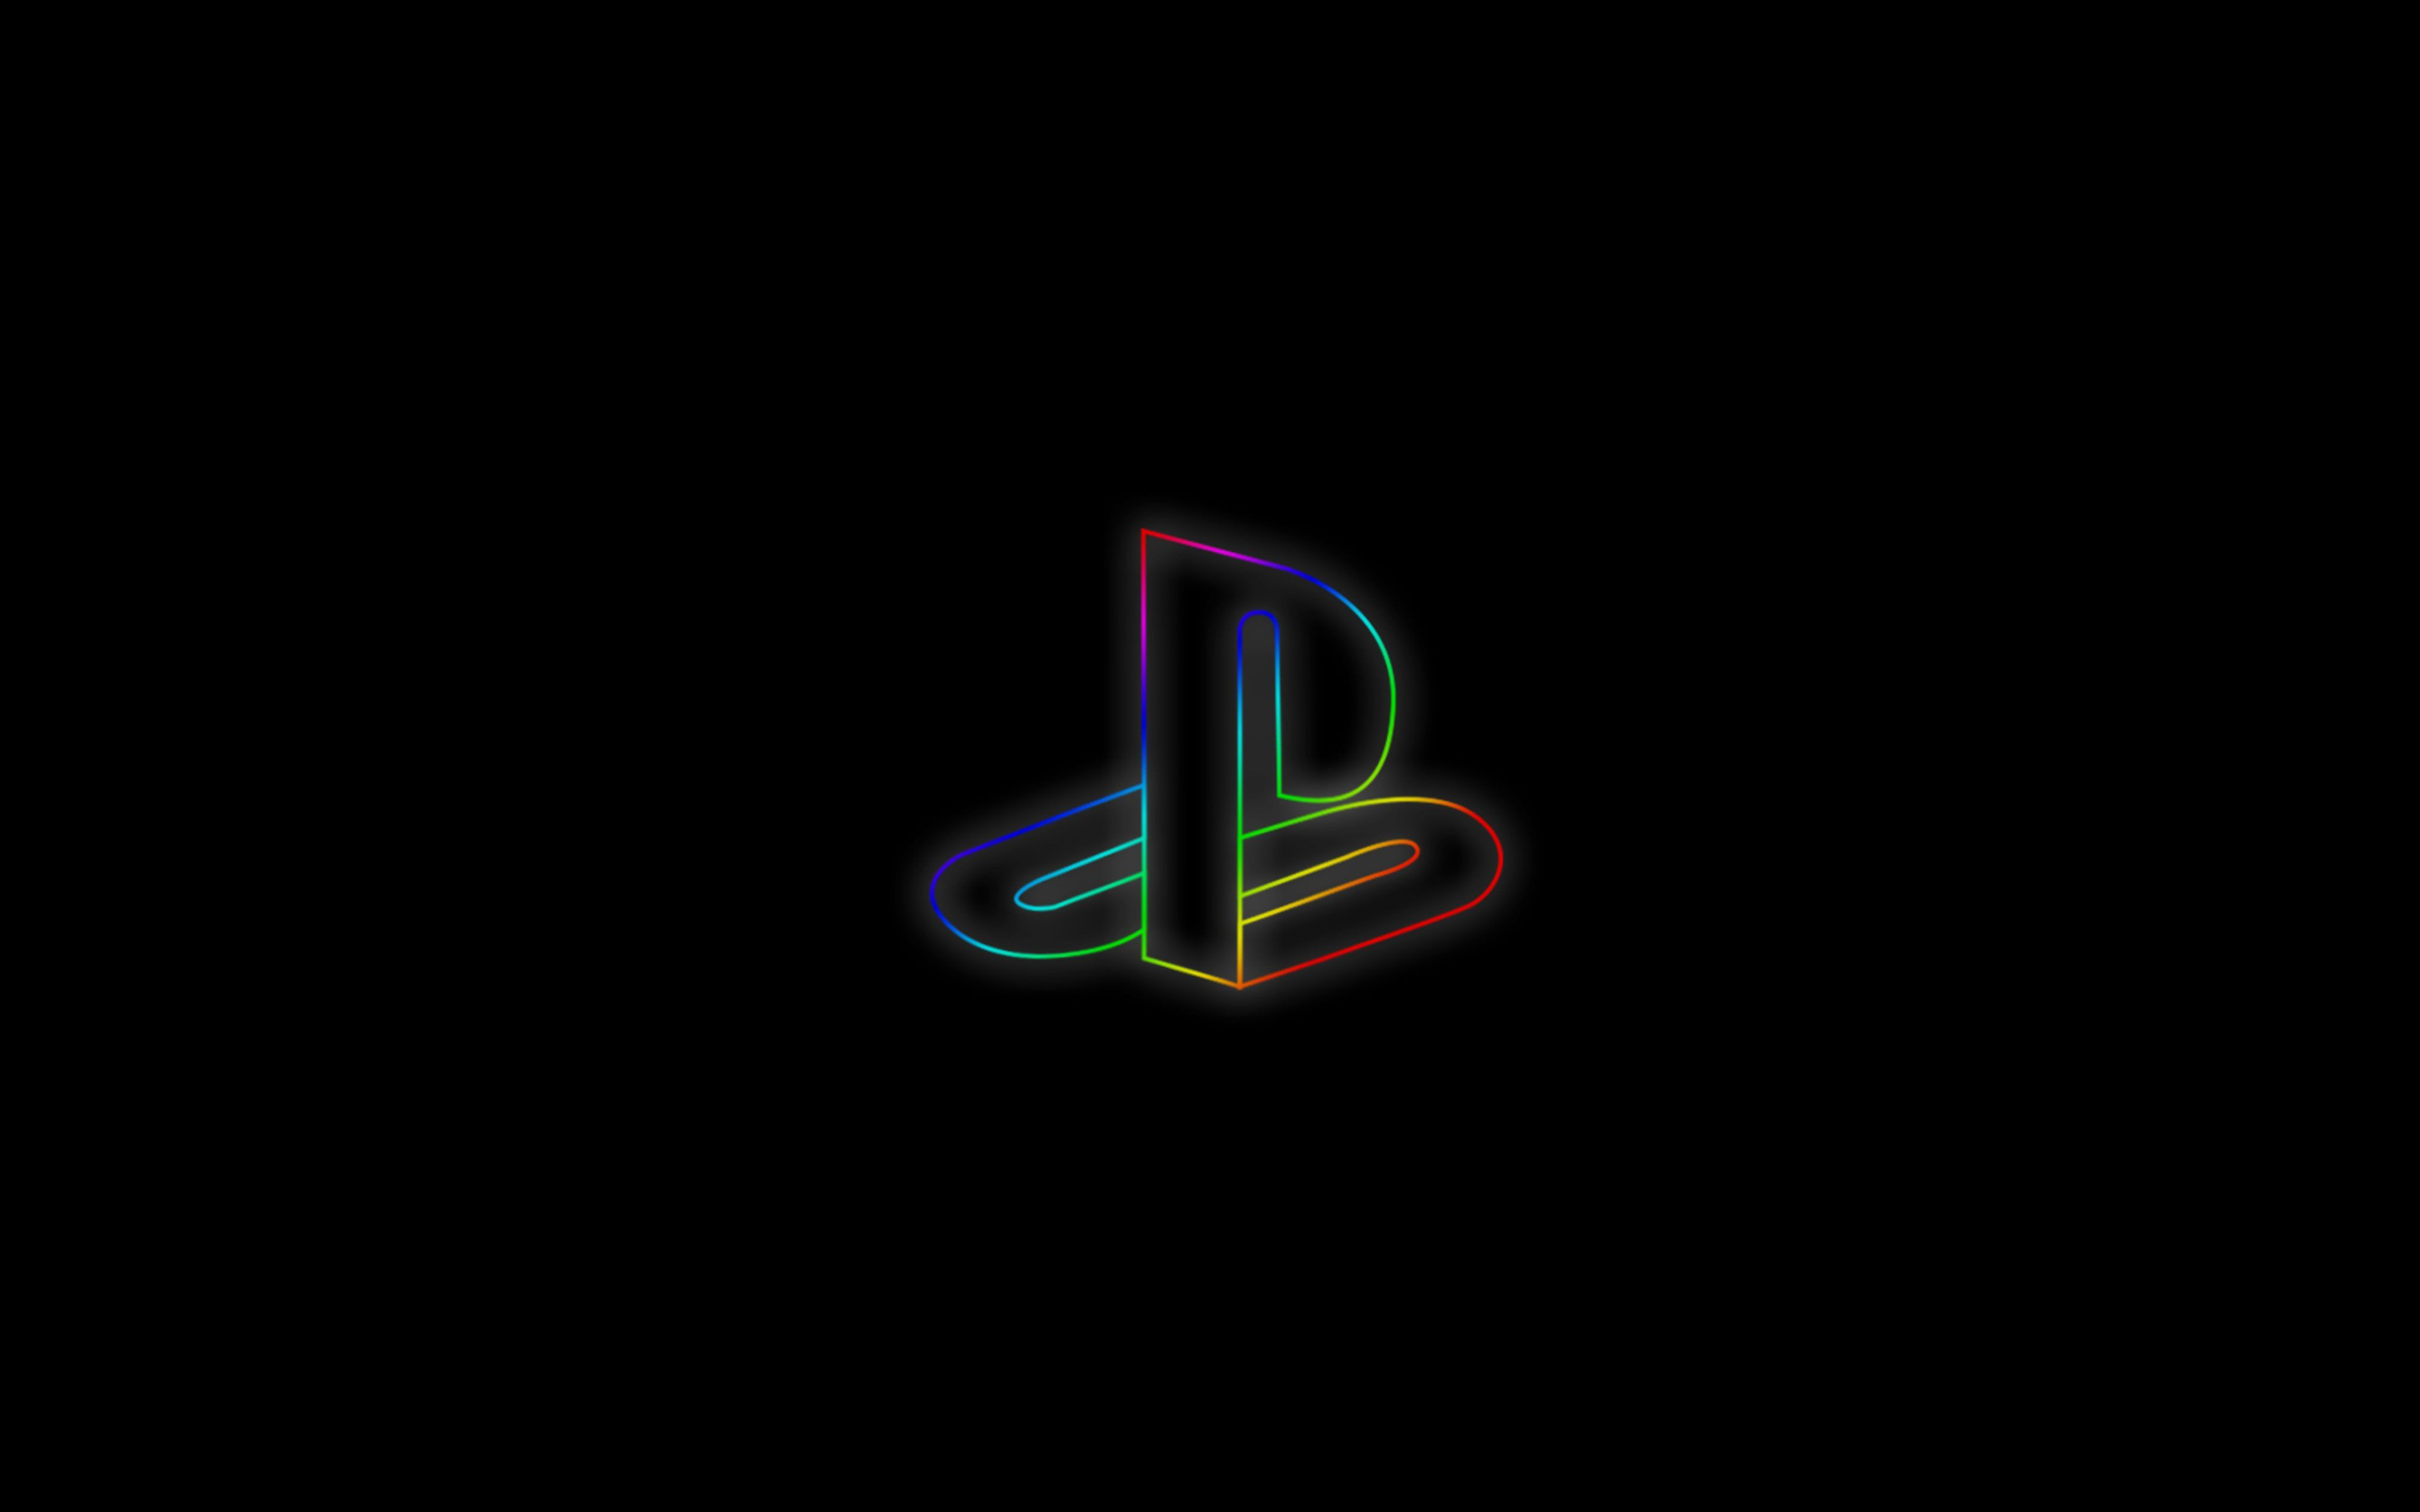 Download wallpaper 4k, PlayStation neon logo, minimal, black background, creative, artwork, PlayStation minimalism, PlayStation logo, brands, PlayStation for desktop with resolution 3840x2400. High Quality HD picture wallpaper